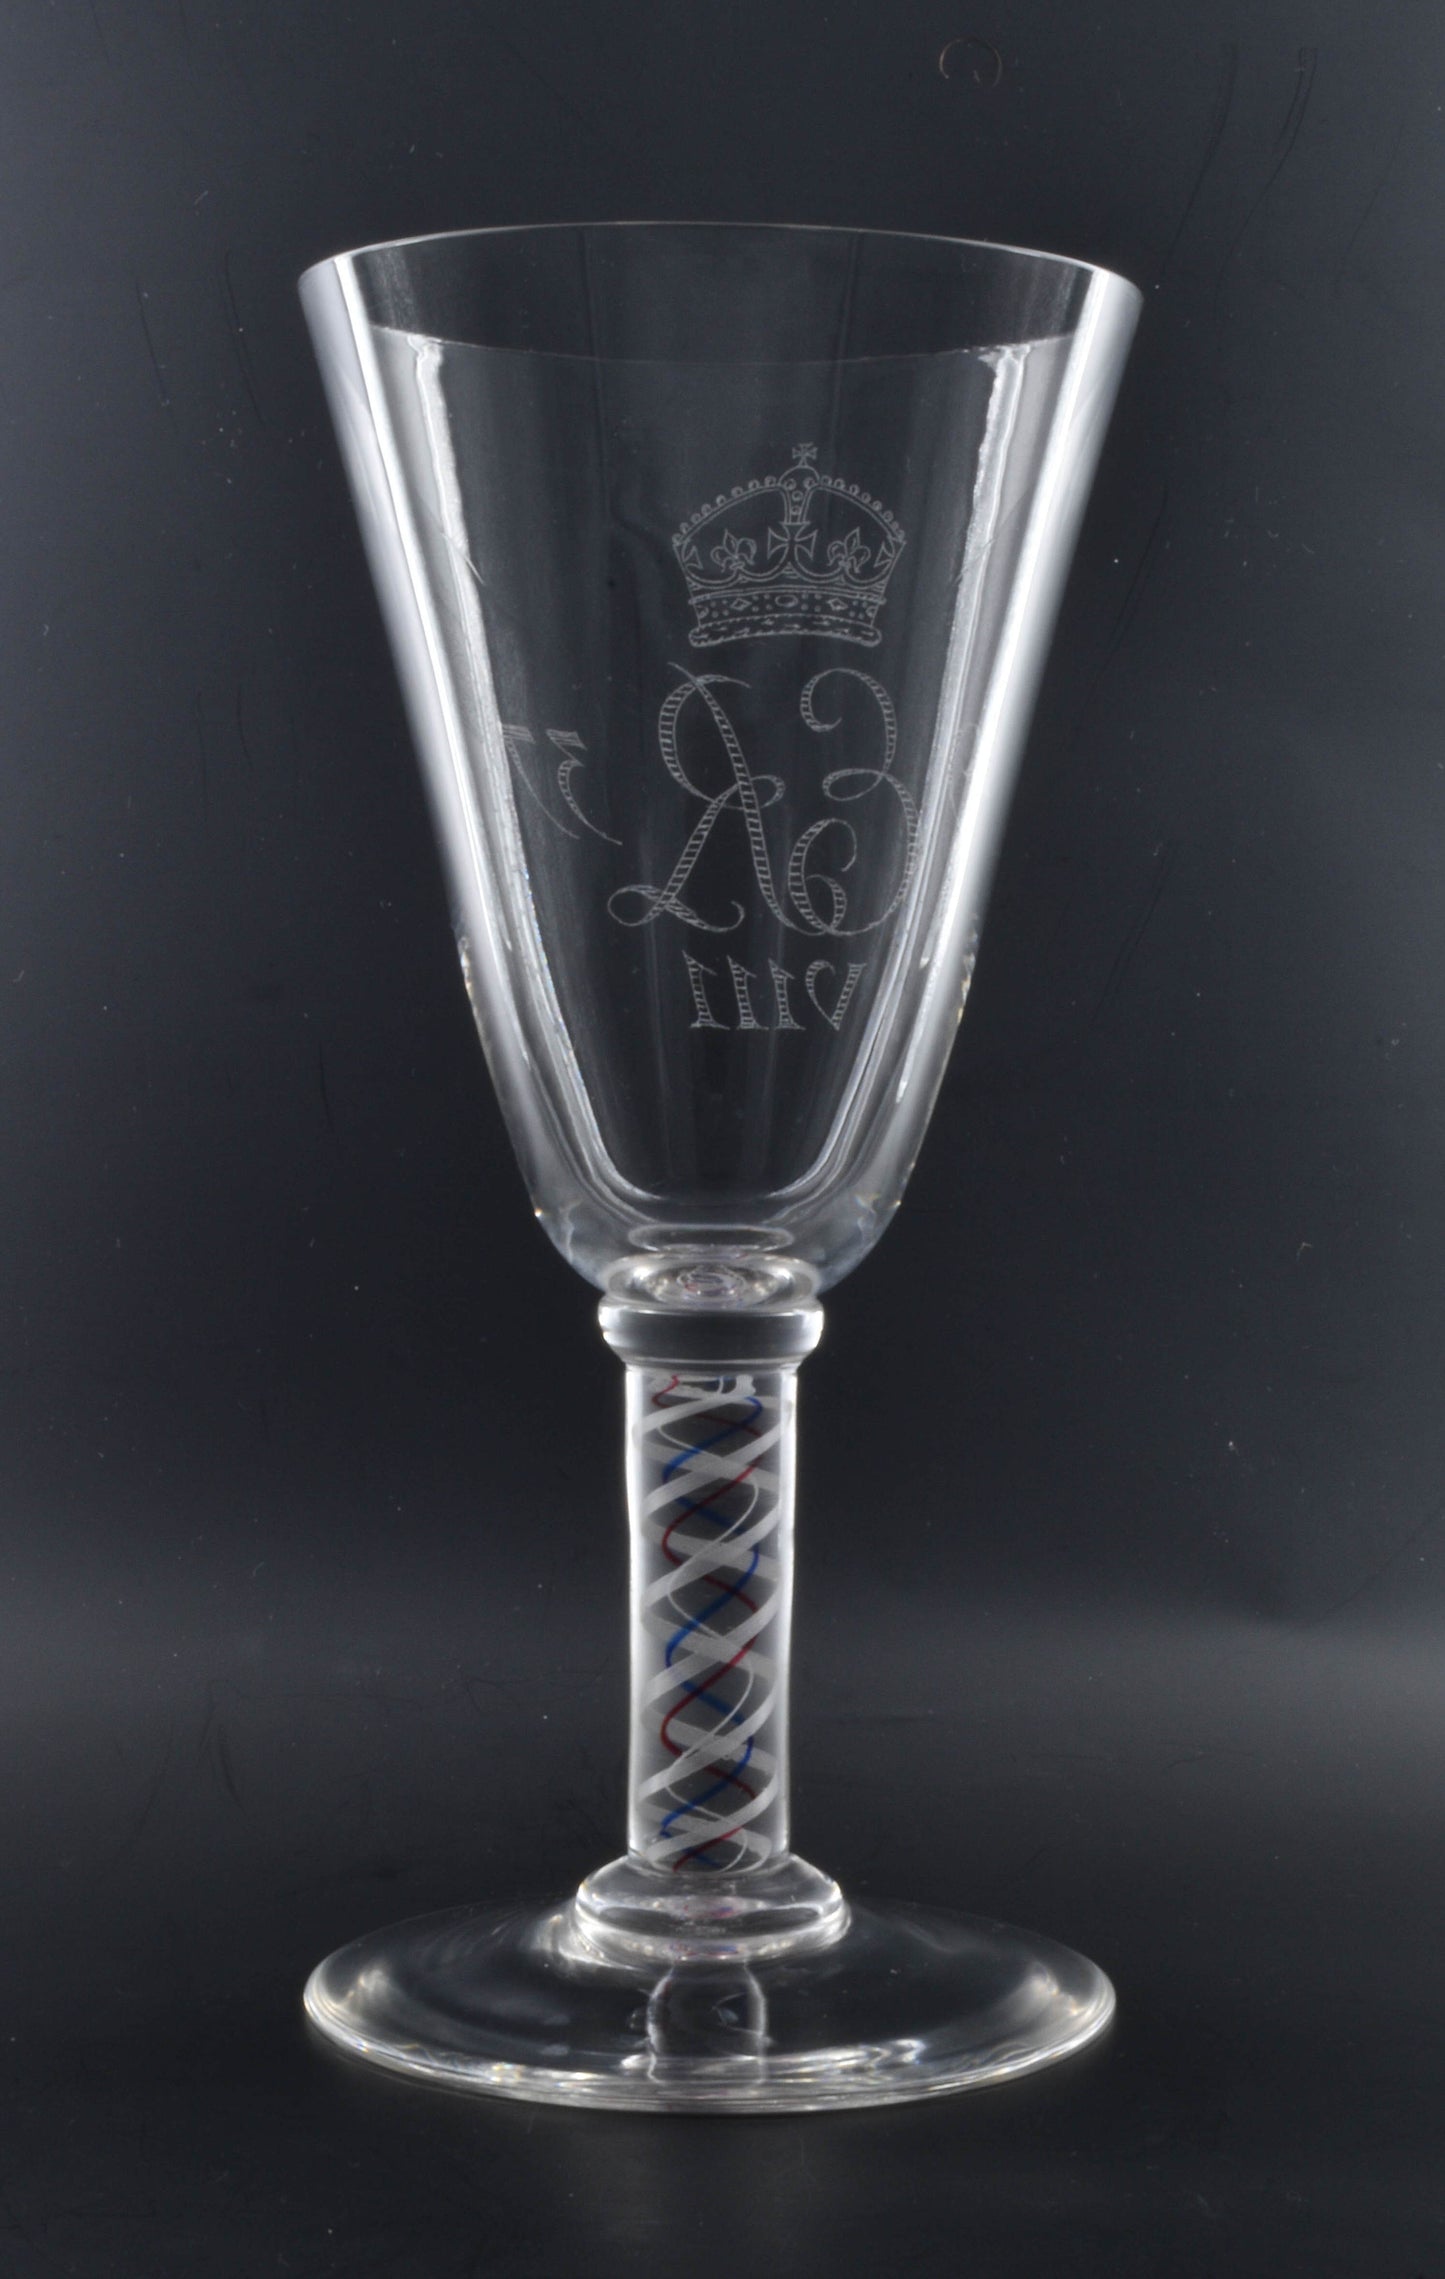 Wine glass with airtwist stem, for the Coronation of Edward VIII